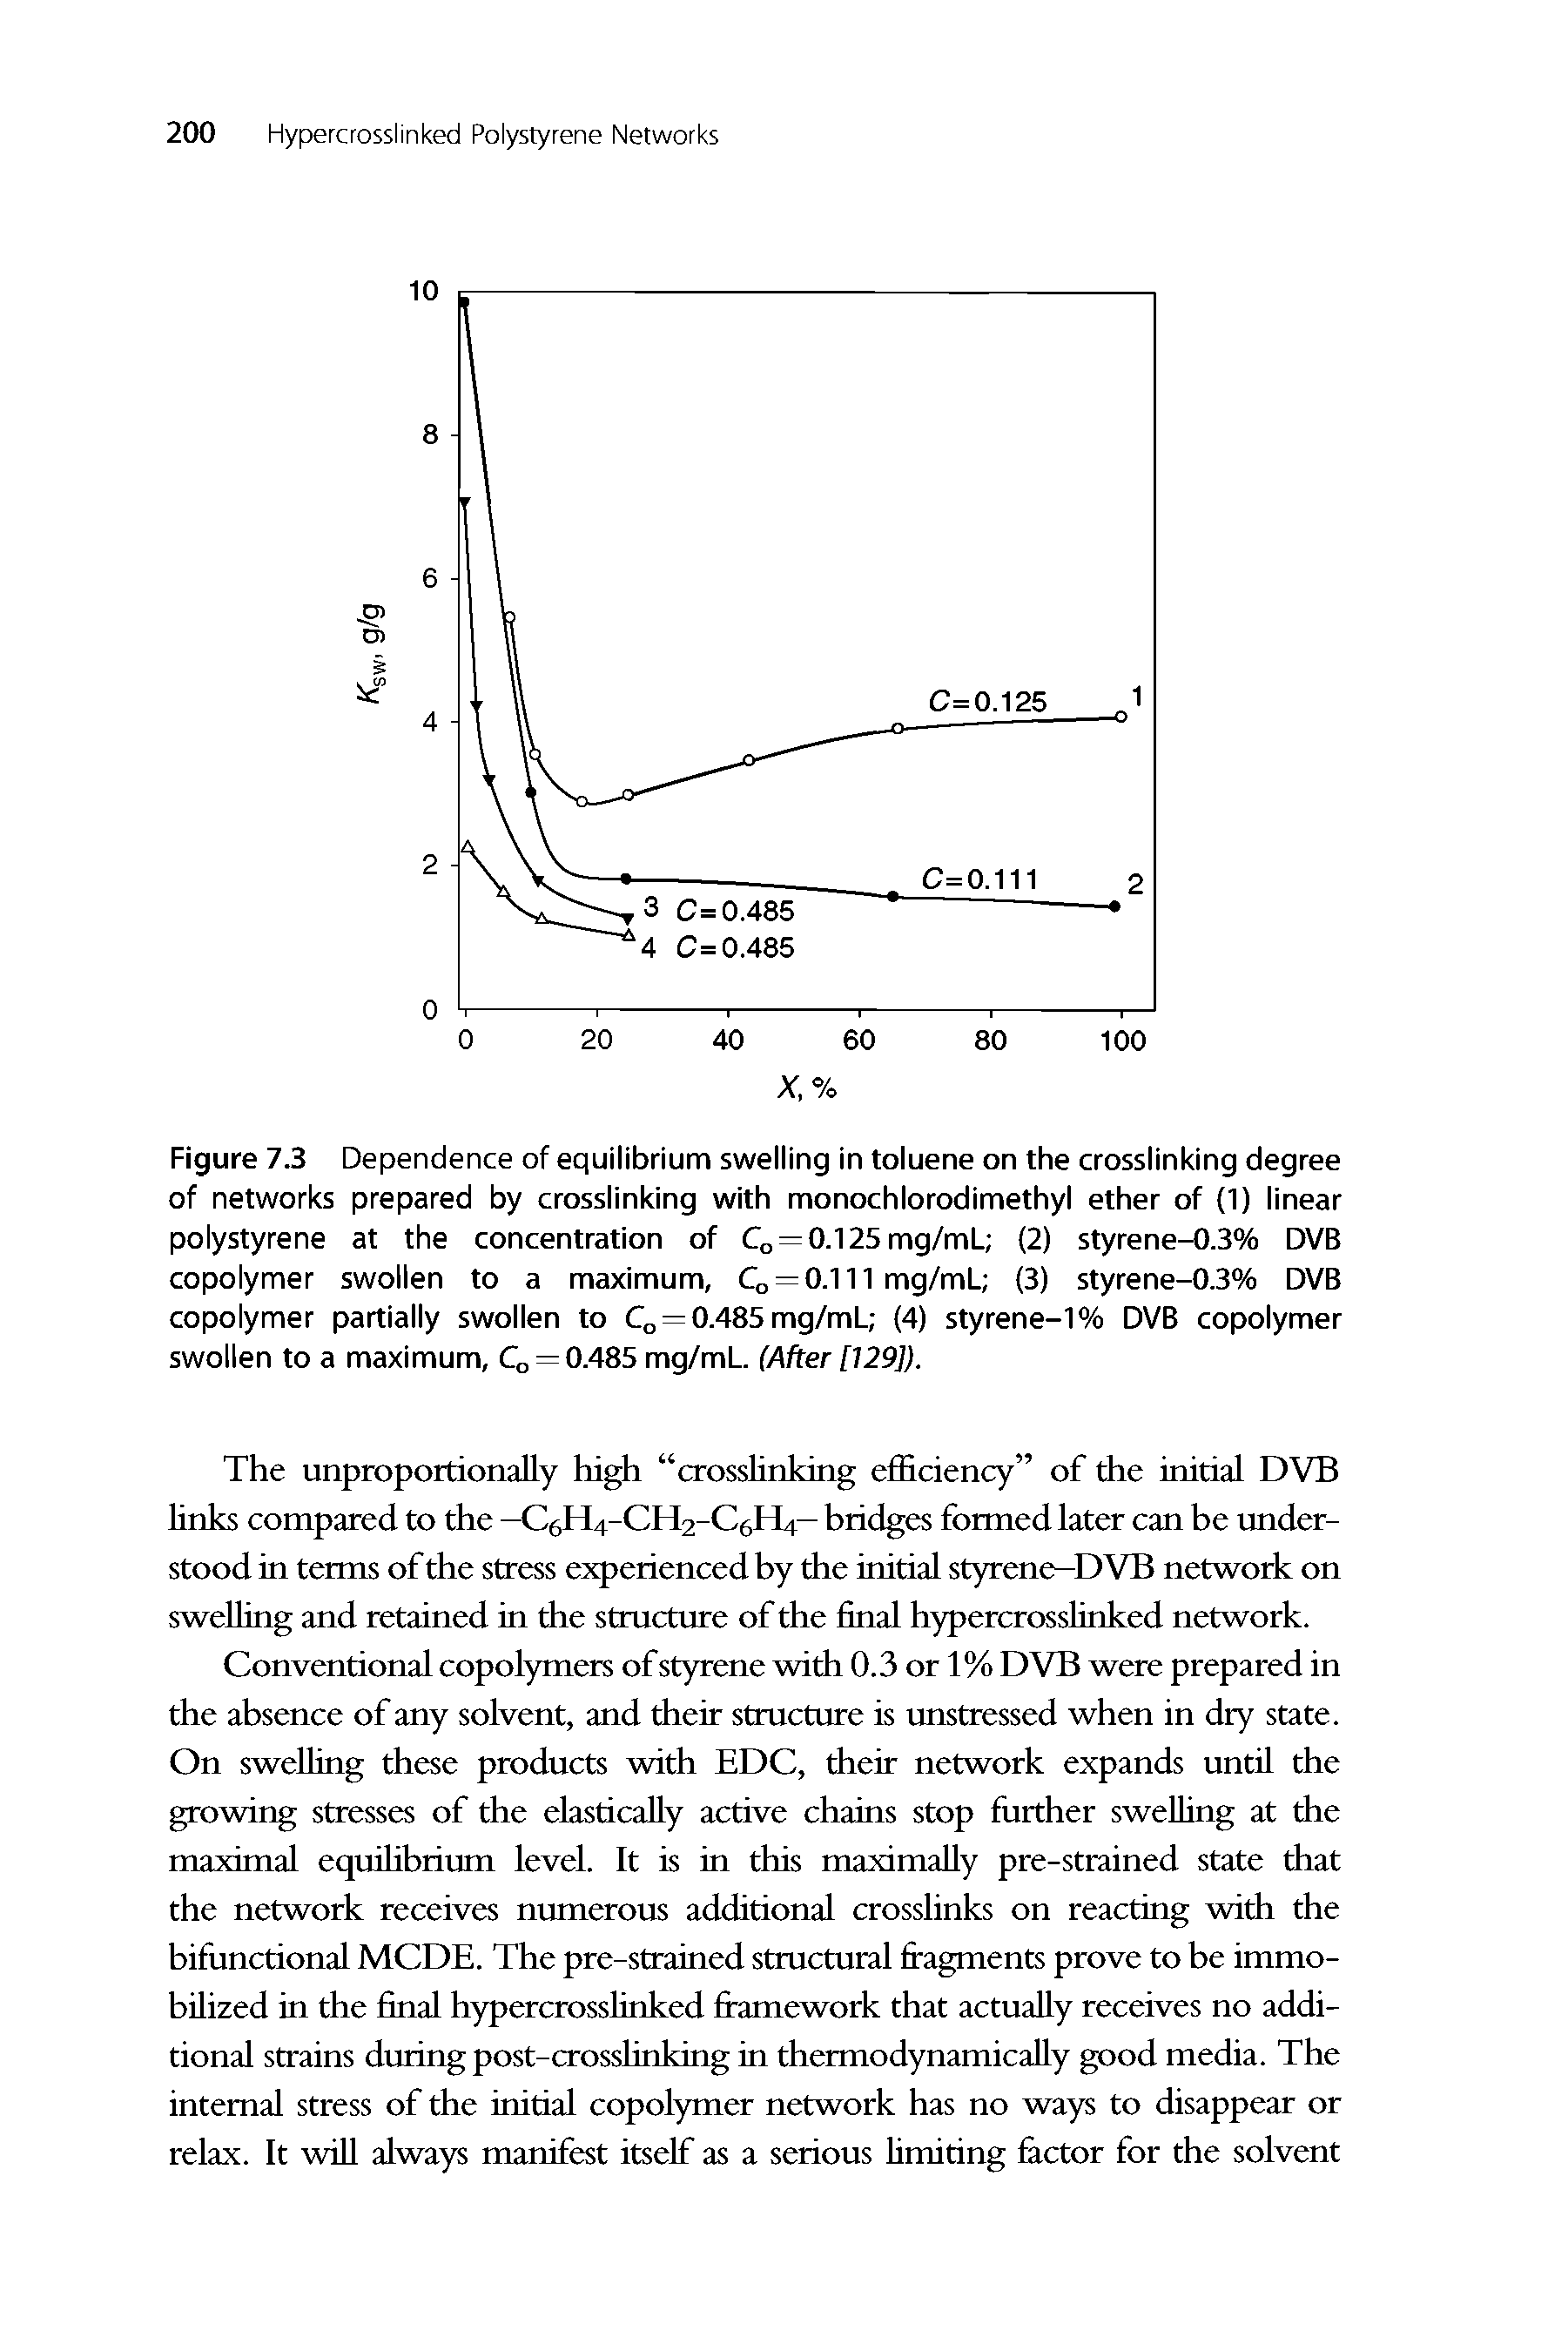 Figure 7.3 Dependence of equilibrium swelling in toluene on the crosslinking degree of networks prepared by crosslinking with monochlorodimethyl ether of (1) linear polystyrene at the concentration of Co = 0.125mg/mL (2) styrene-0.3% DVB copolymer swollen to a maximum, Q, = 0.111 mg/mL (3) styrene-0.3% DVB copolymer partially swollen to Q = 0.485 mg/mL (4) styrene-1 % DVB copolymer swollen to a maximum, Q, = 0.485 mg/mL. (After [129]).